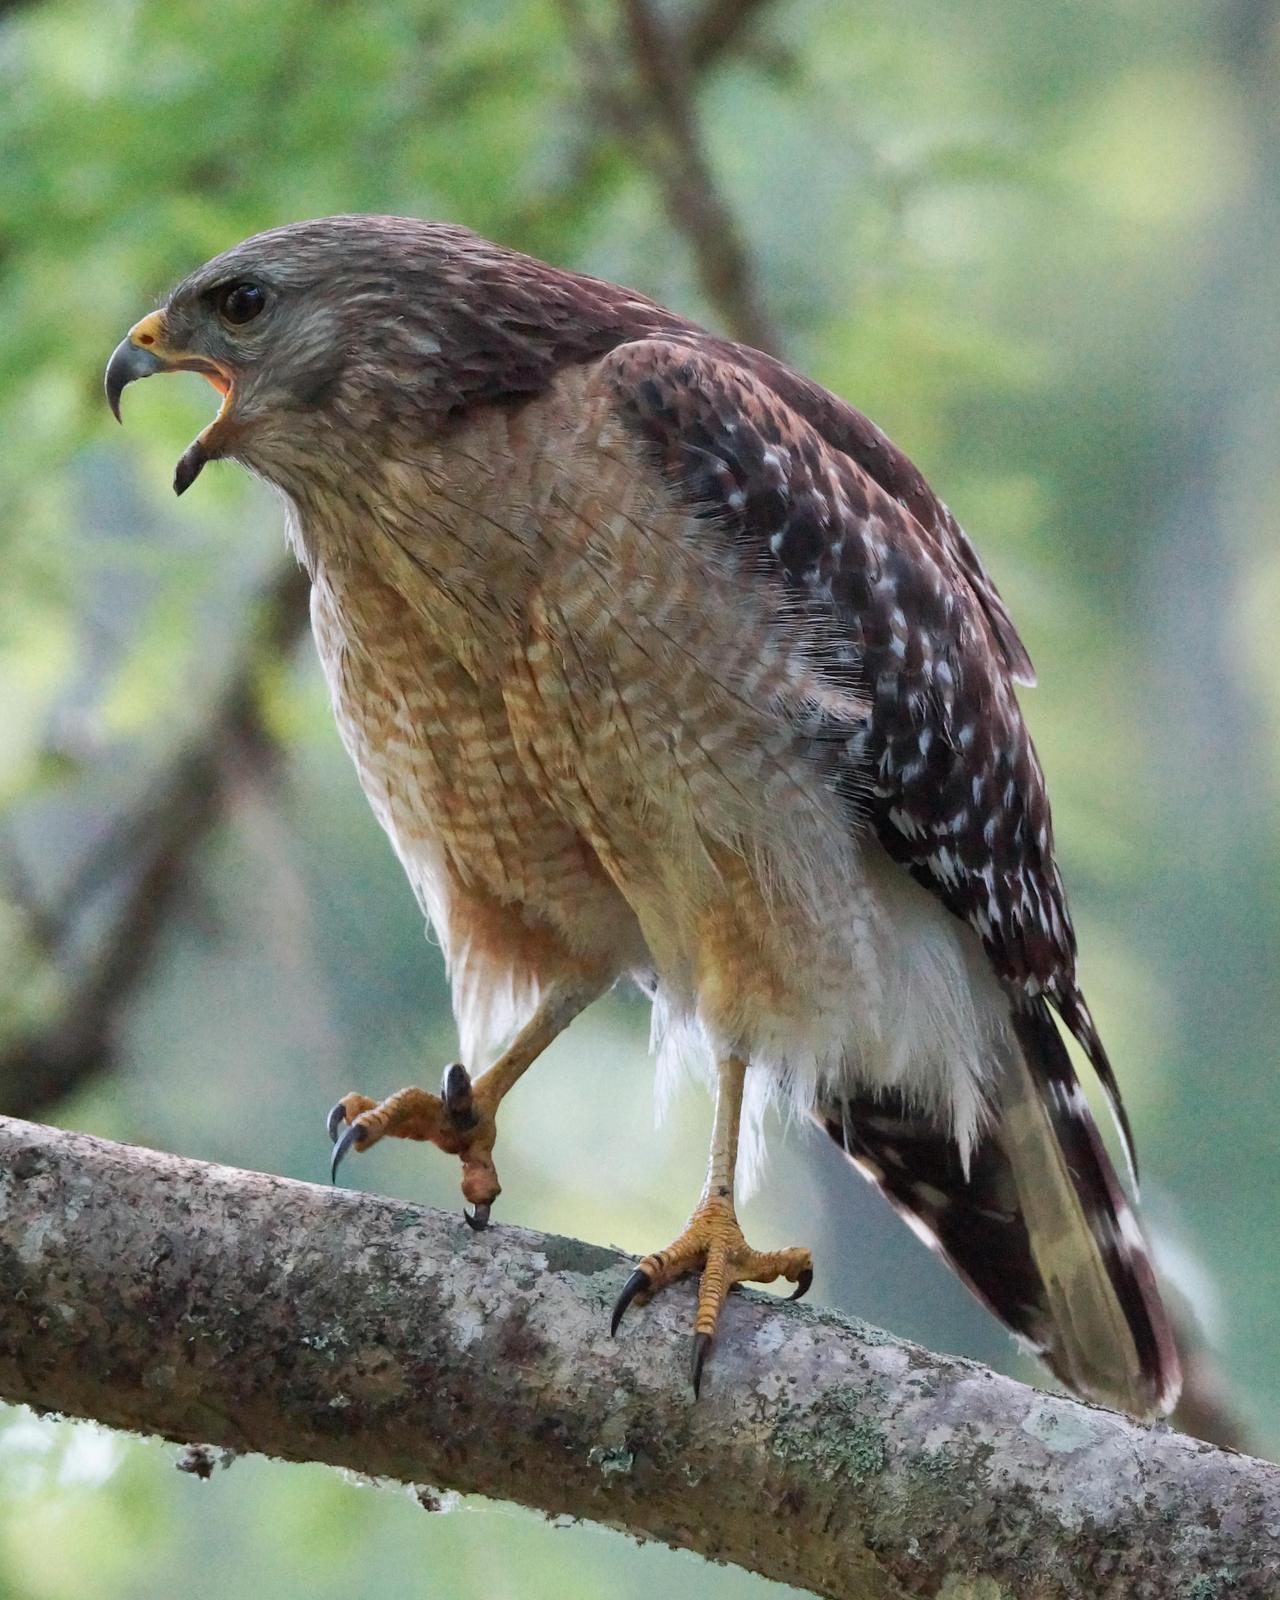 Red-shouldered Hawk Photo by Steve Percival